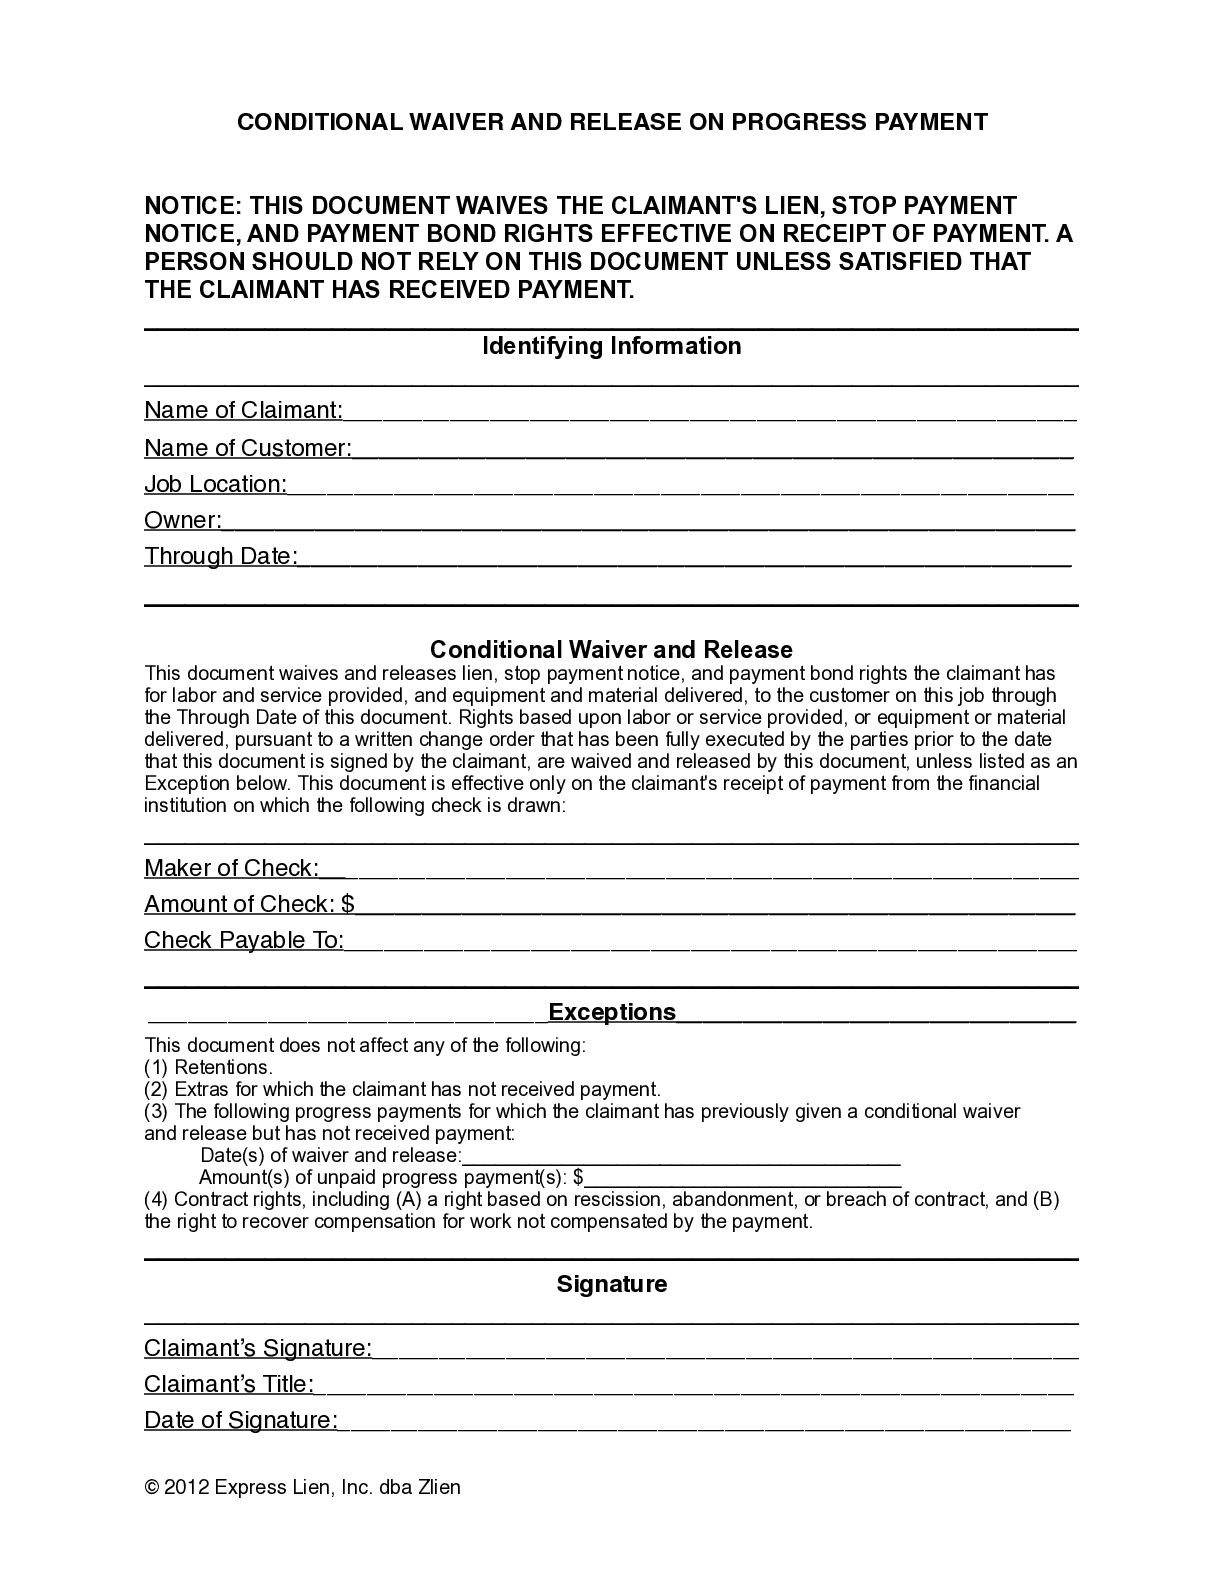 Indiana Partial Conditional Lien Waiver Form - free from